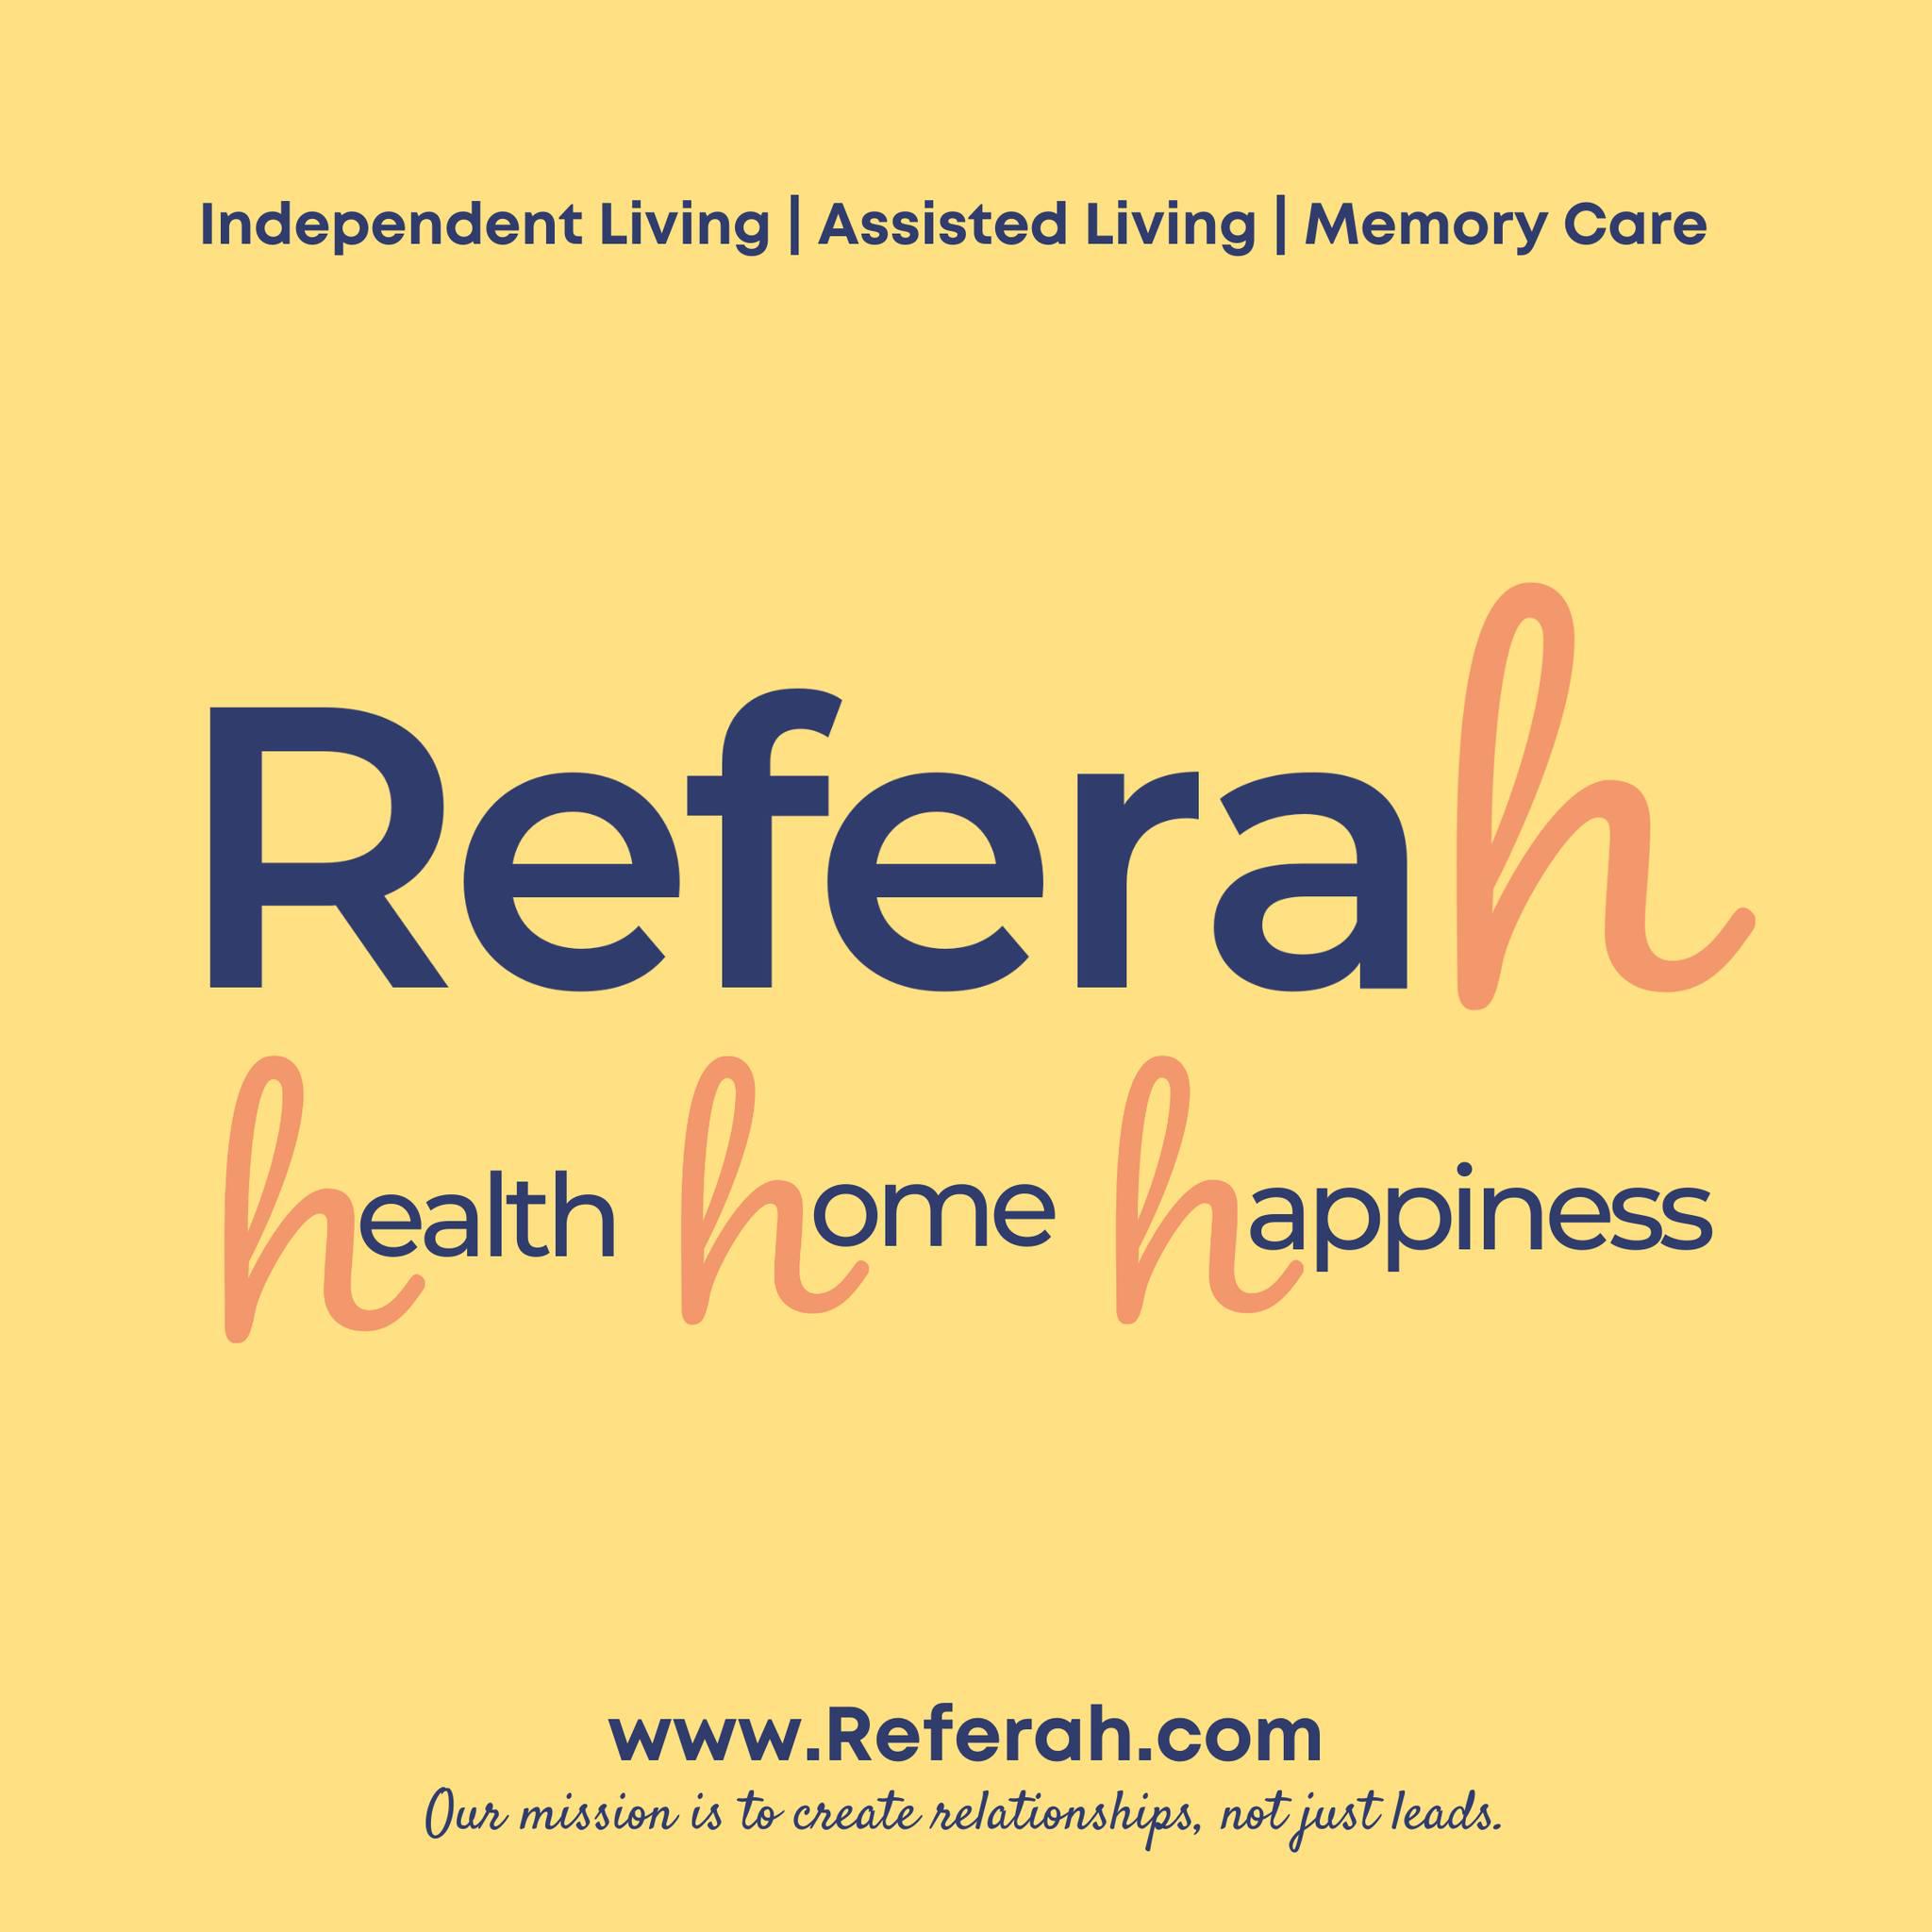 Referah - Assisted Living, Independent Living, and Memory Care